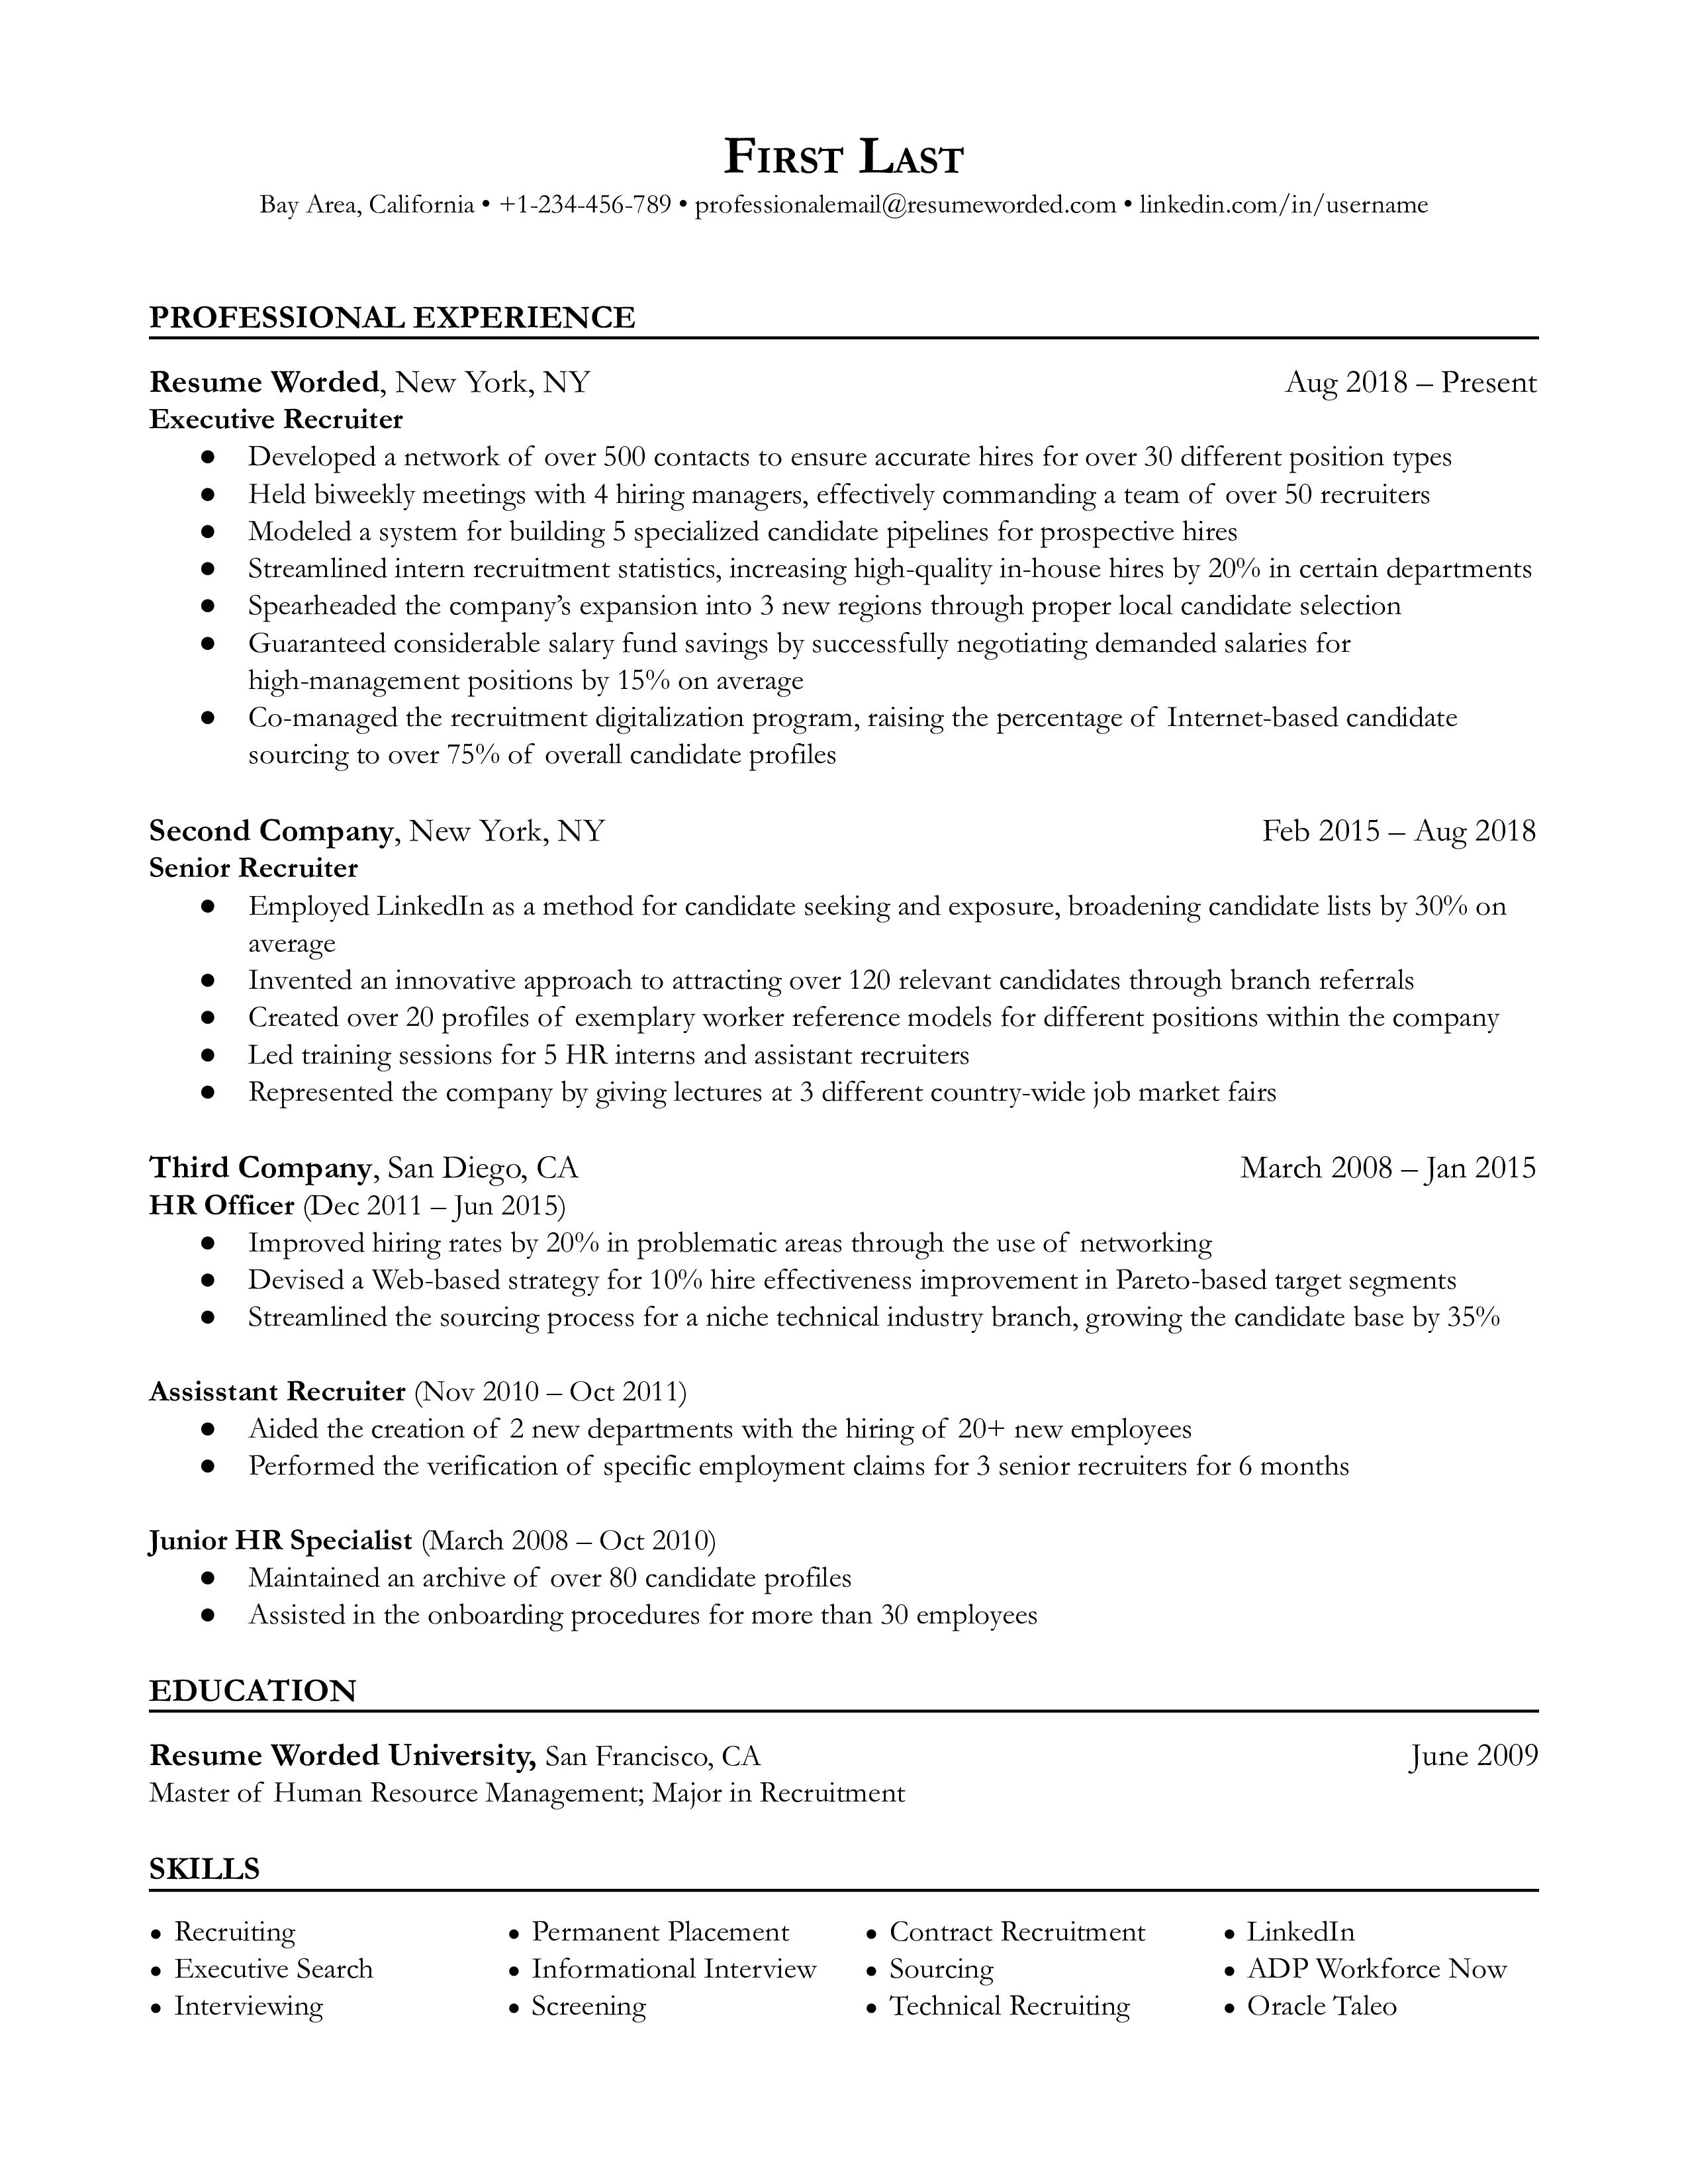 A CV for an Executive Recruiter showcasing relationship-building and strategic insight.